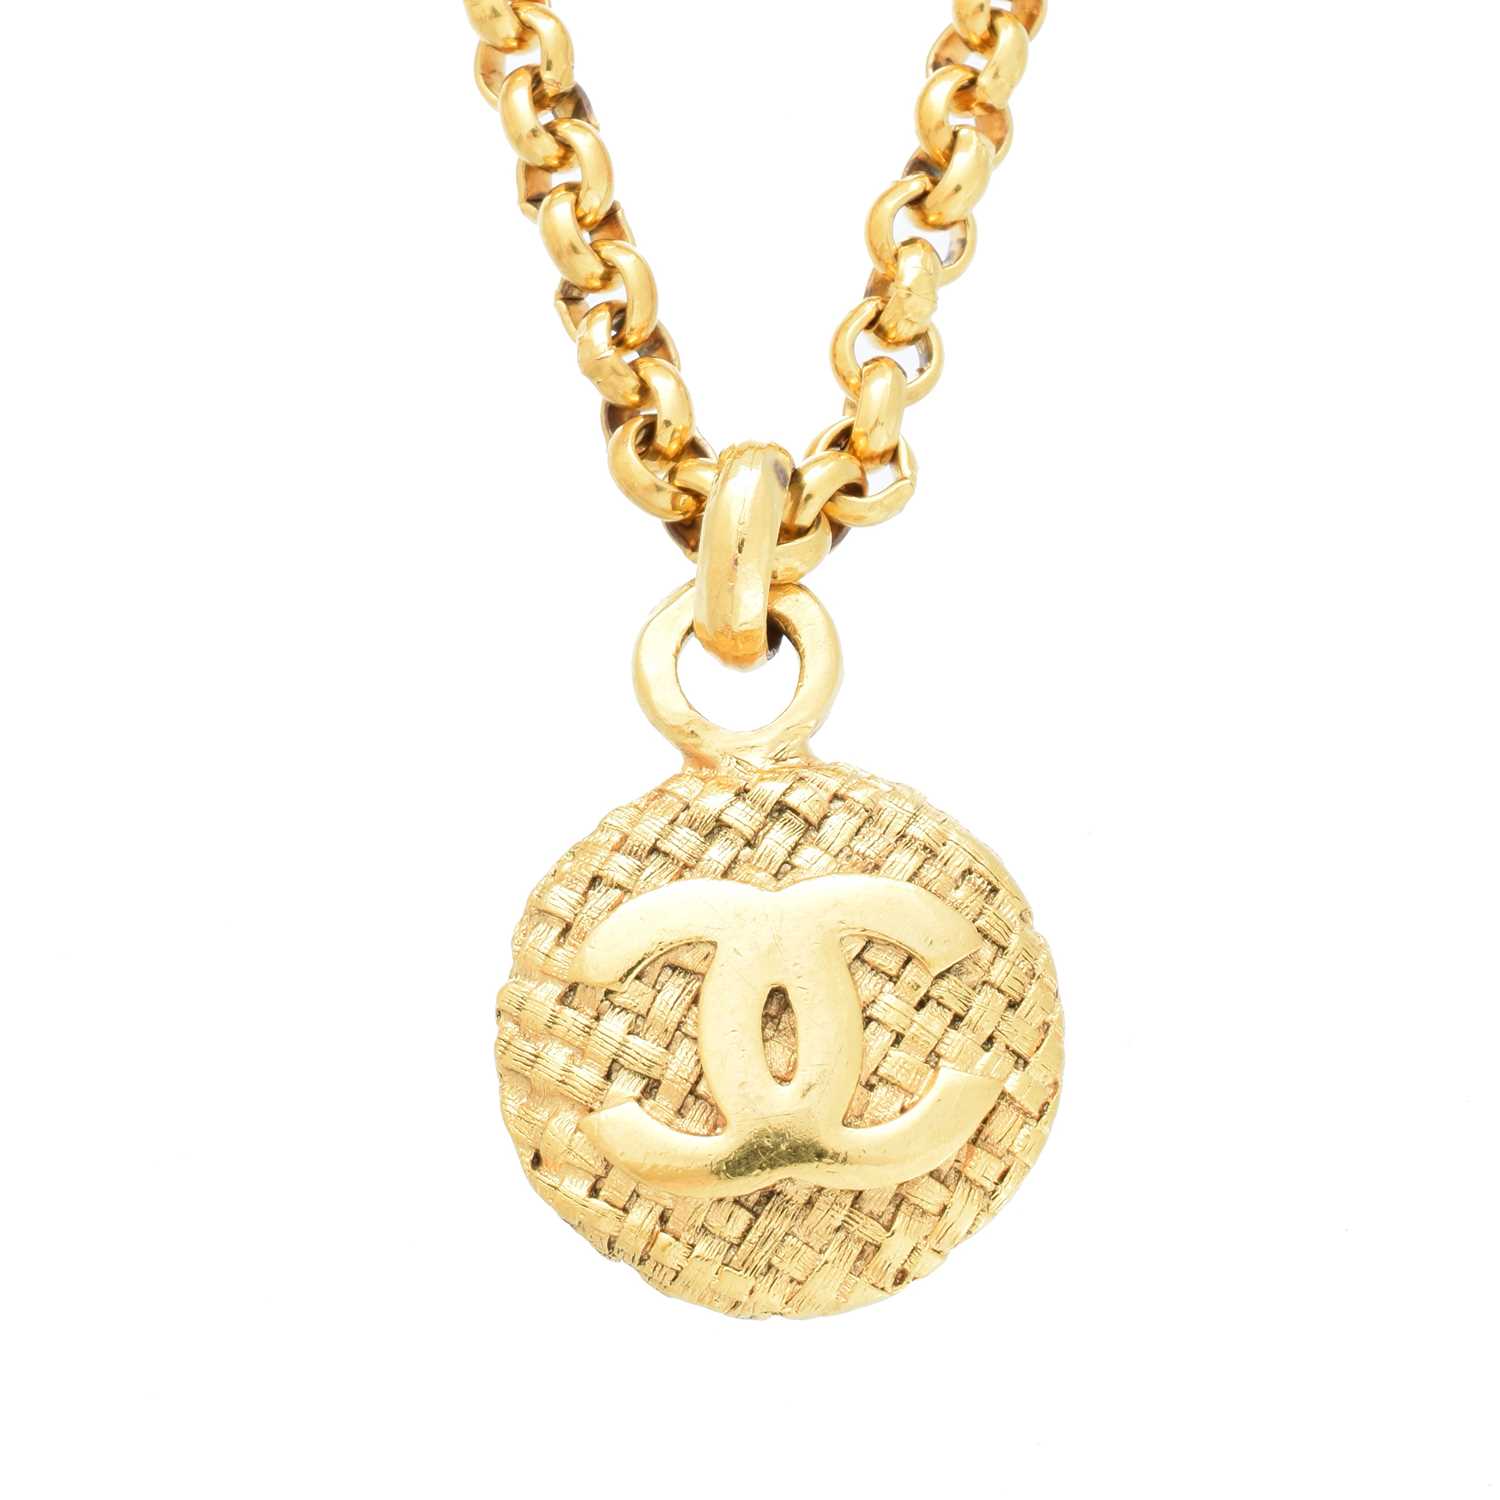 A Chanel pendant necklace, - Image 3 of 3